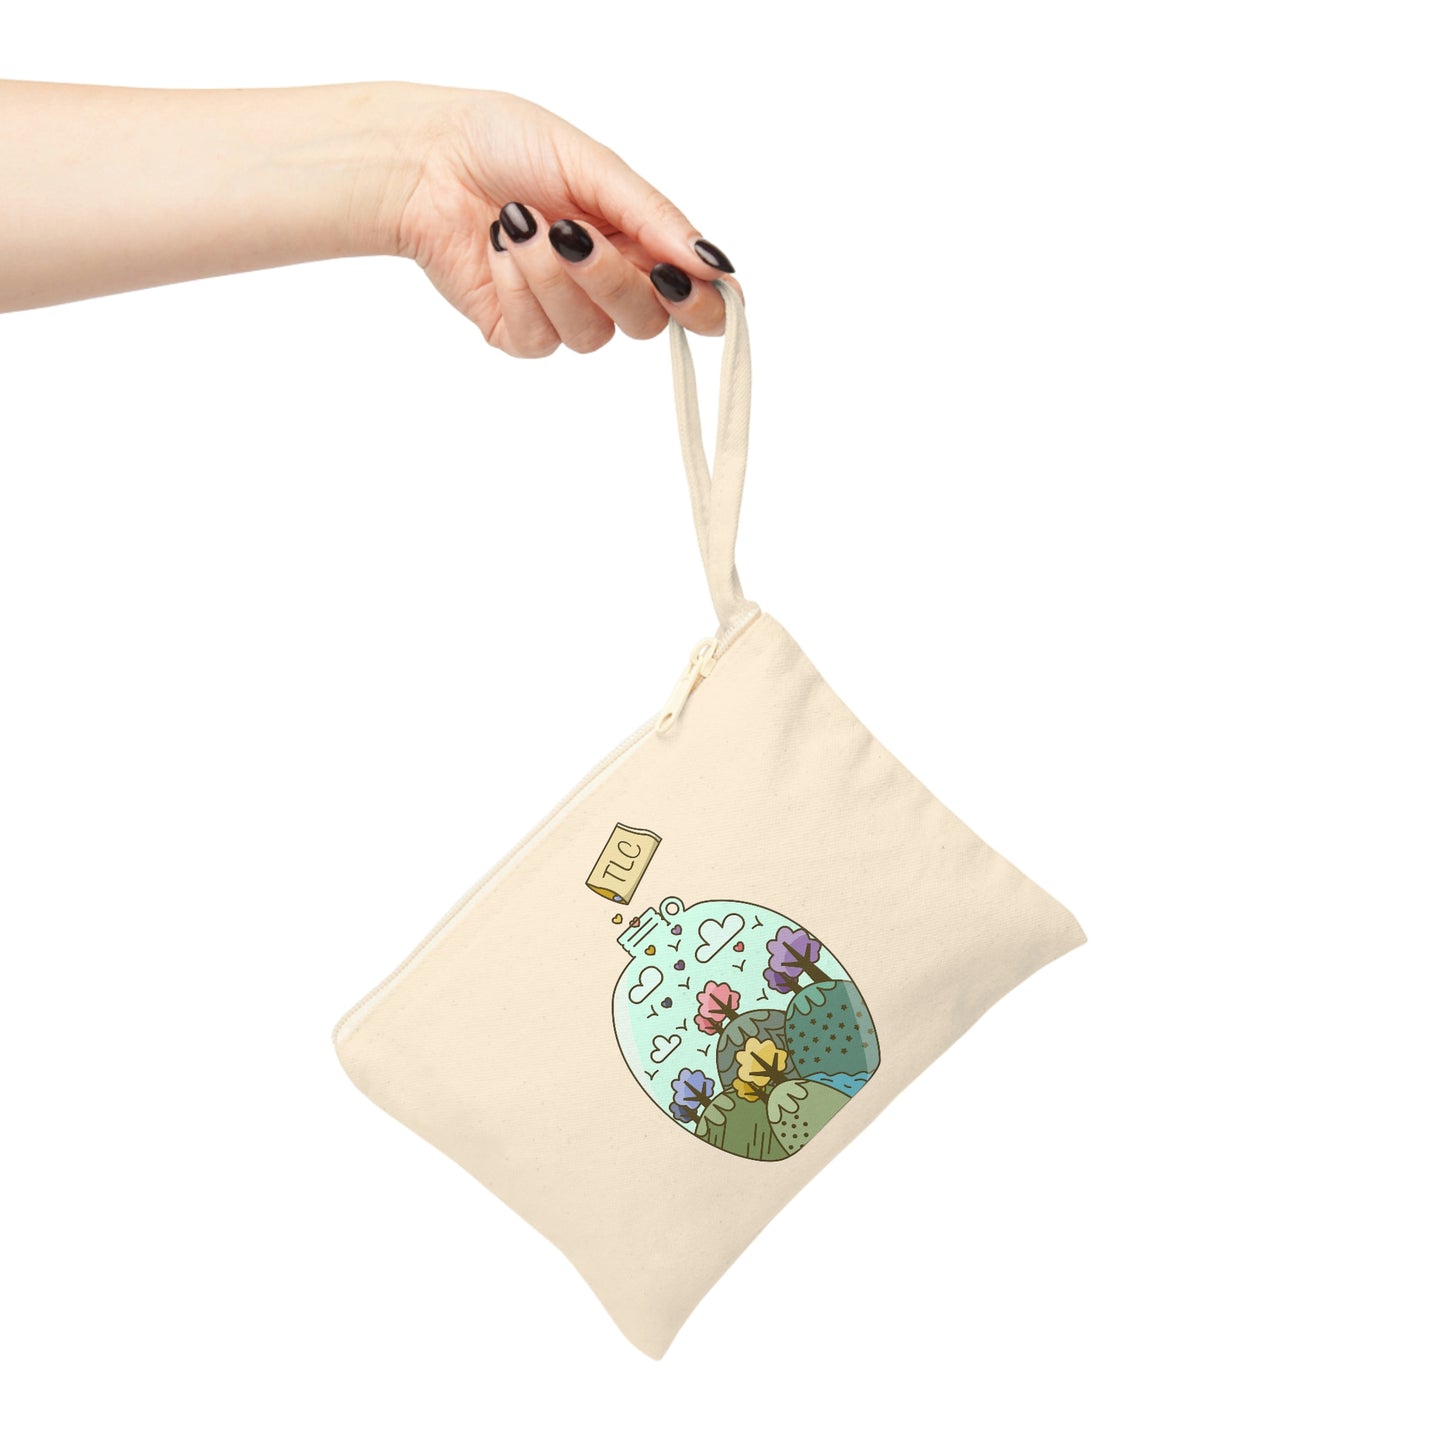 Cotton Zipper Pouch - Take Care of Our Earth